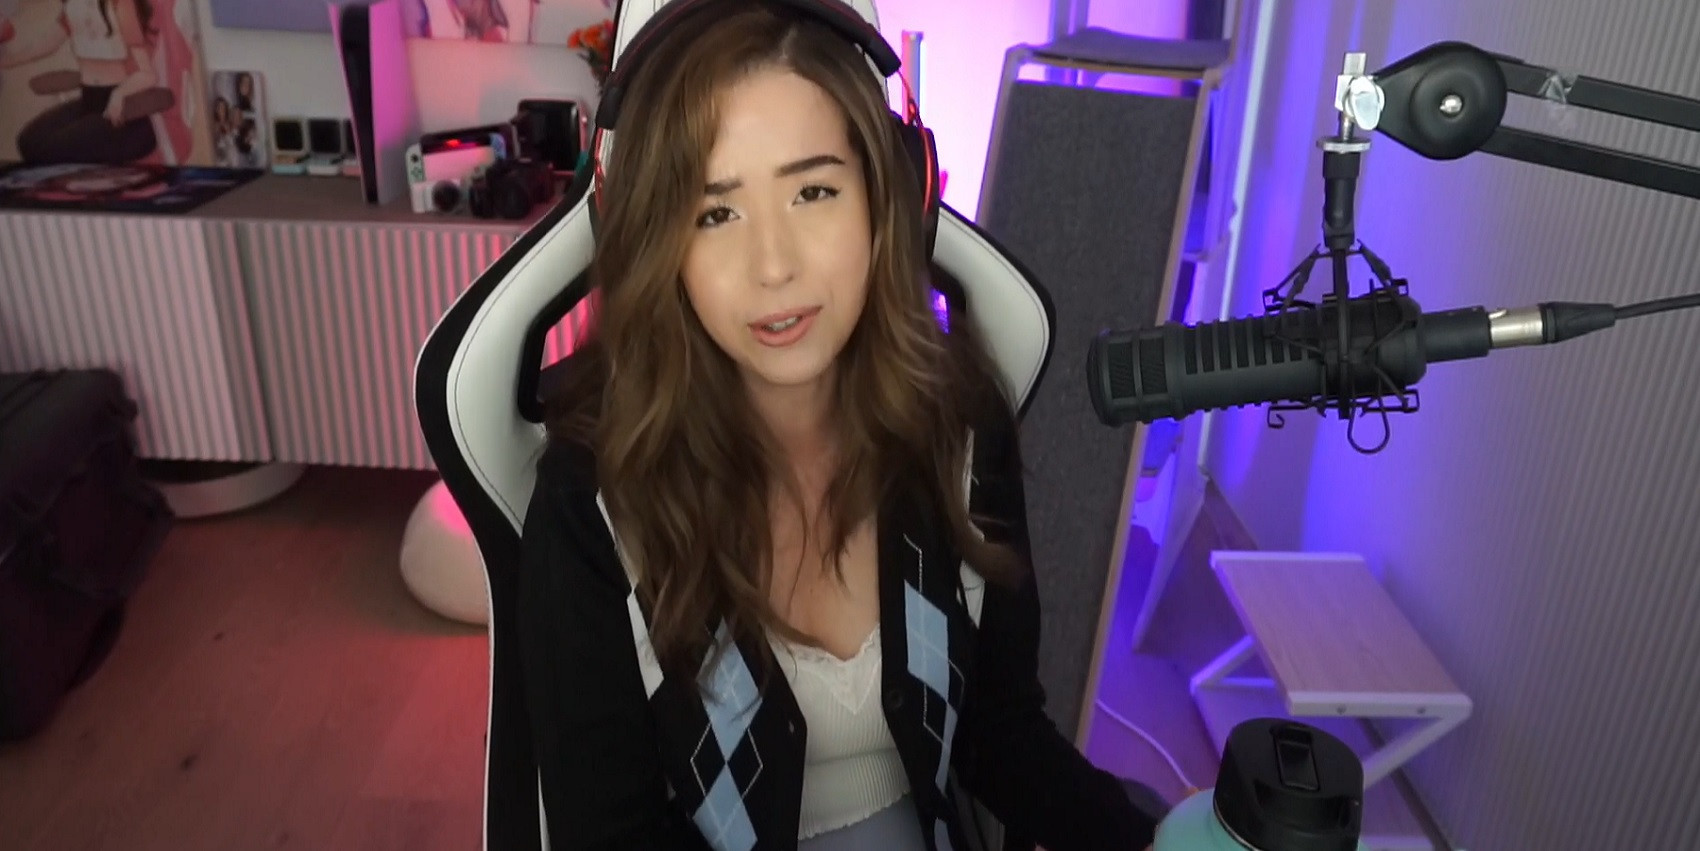 Pokimane criticises ASMR streamers for having their ‘butt out and gurgling into a mic’